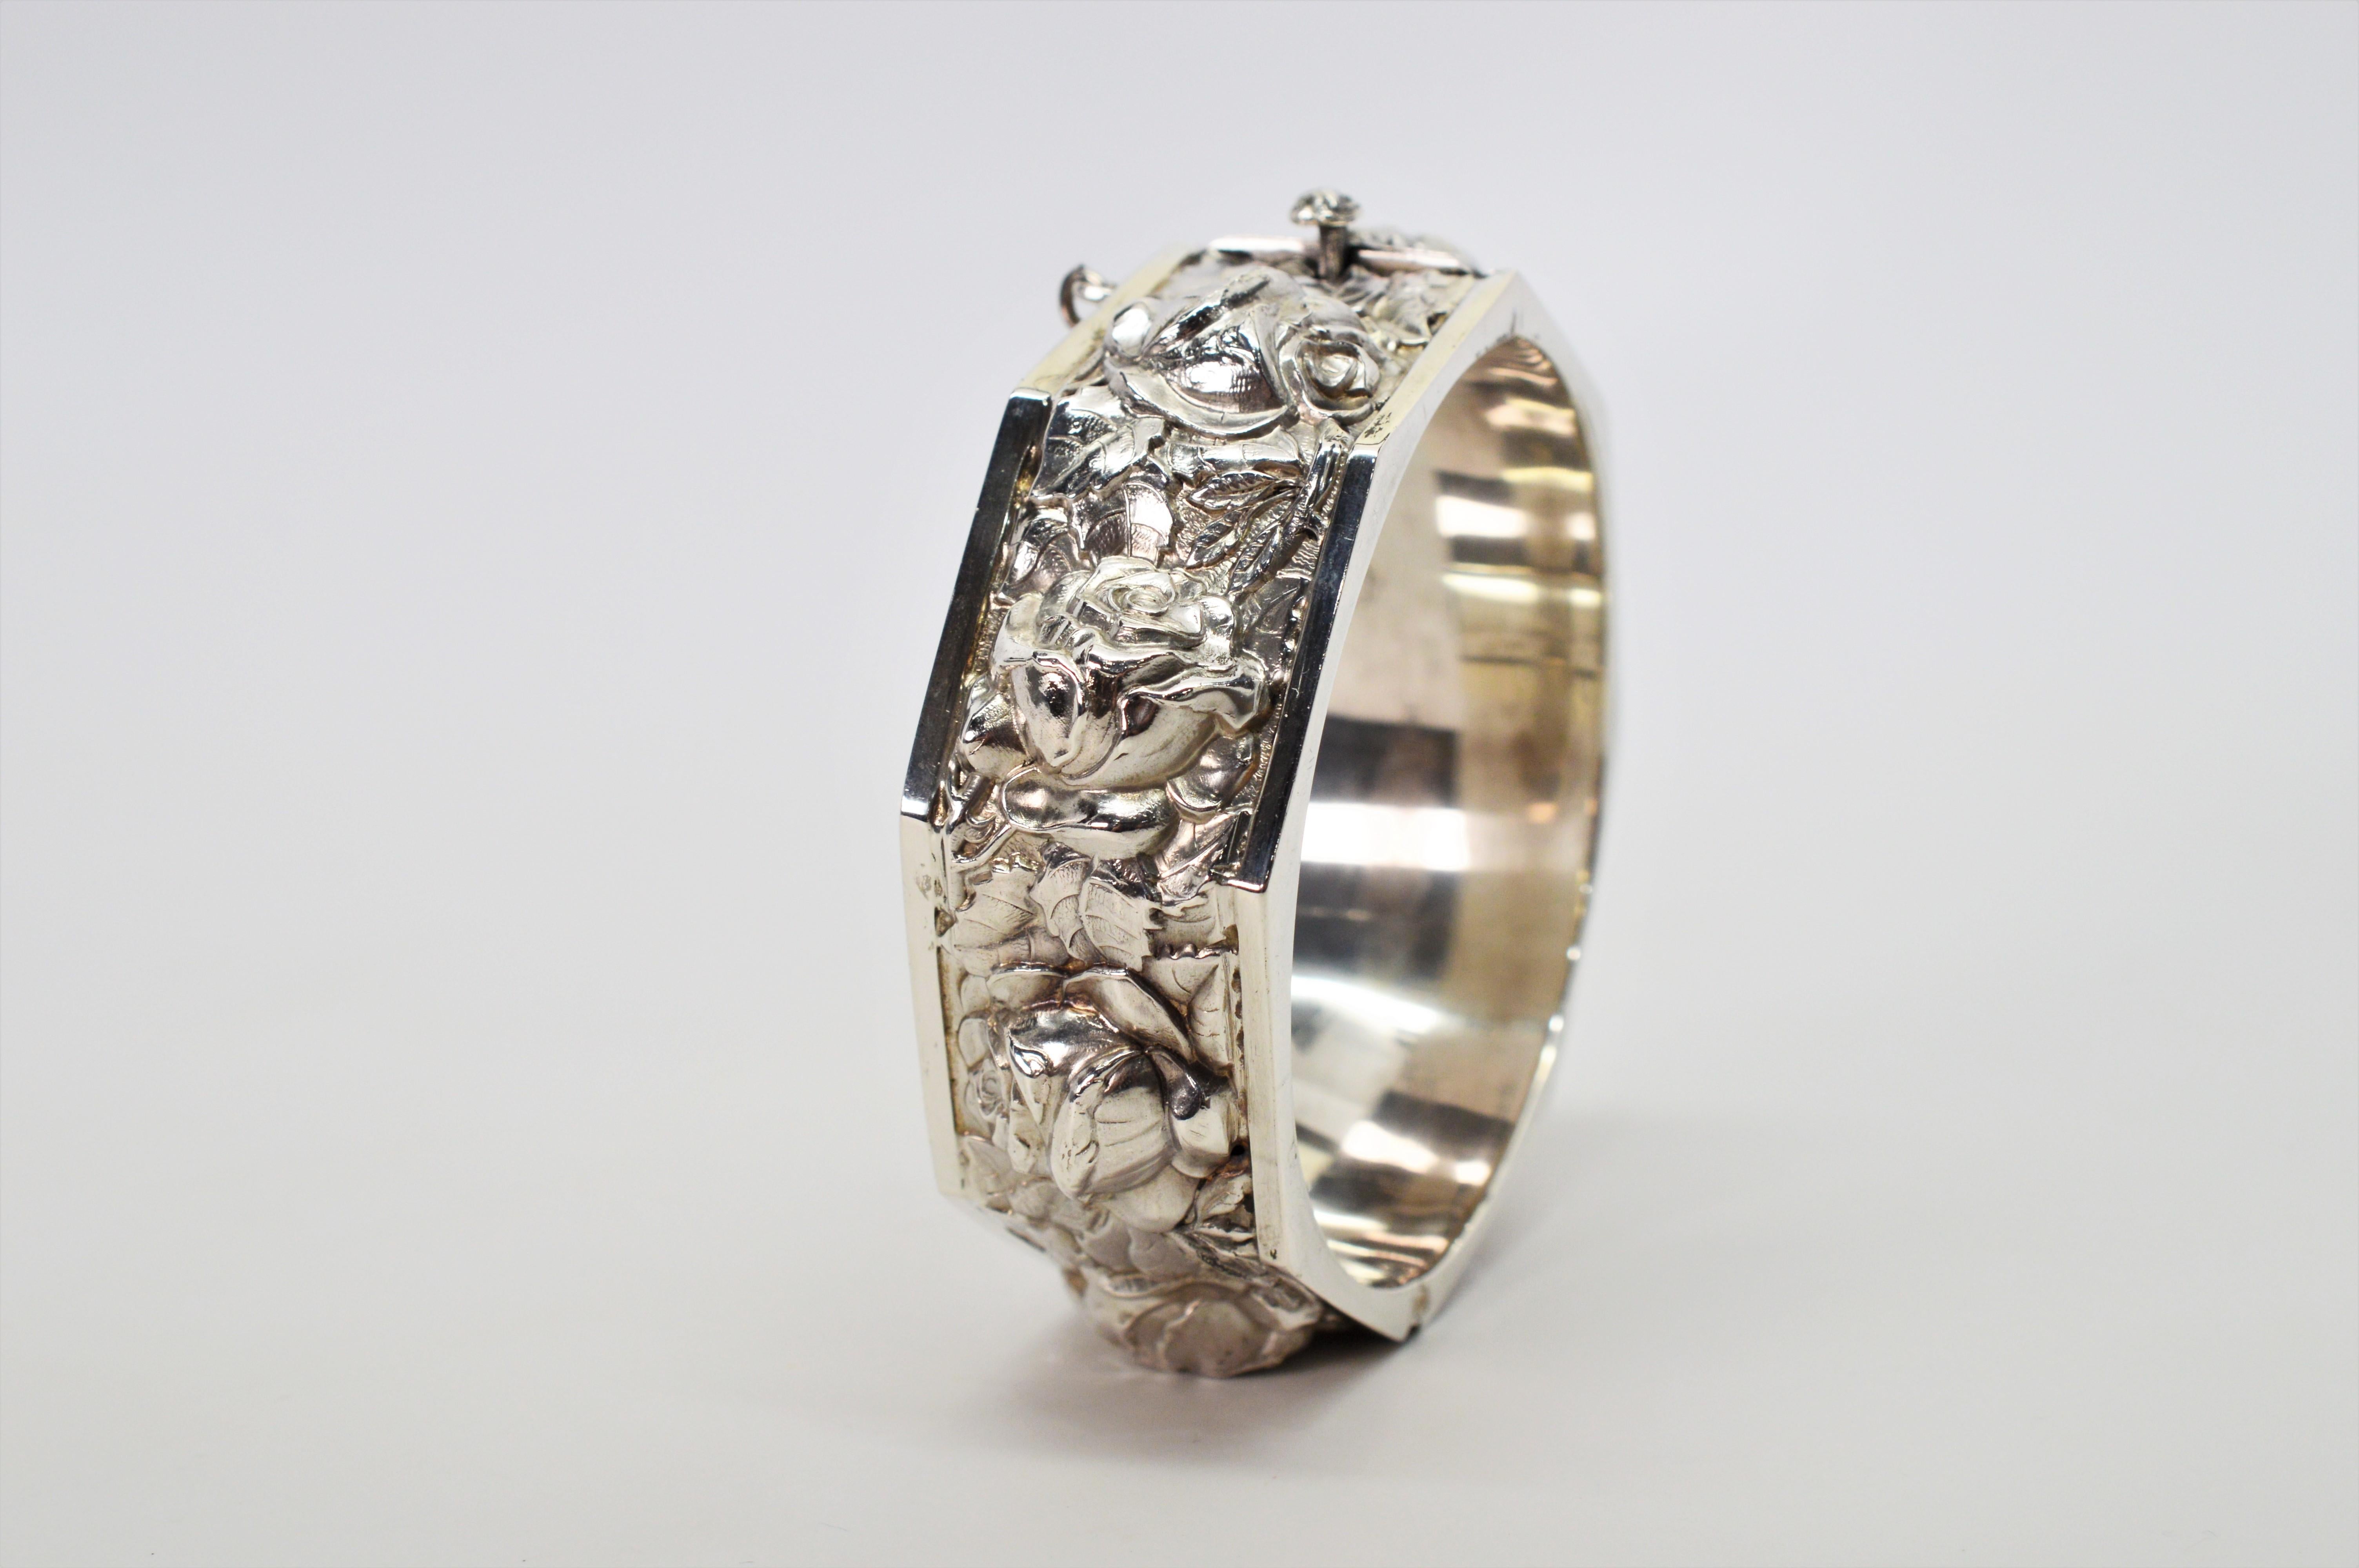 Antique Floral Silver Bangle Bracelet In Good Condition For Sale In Mount Kisco, NY